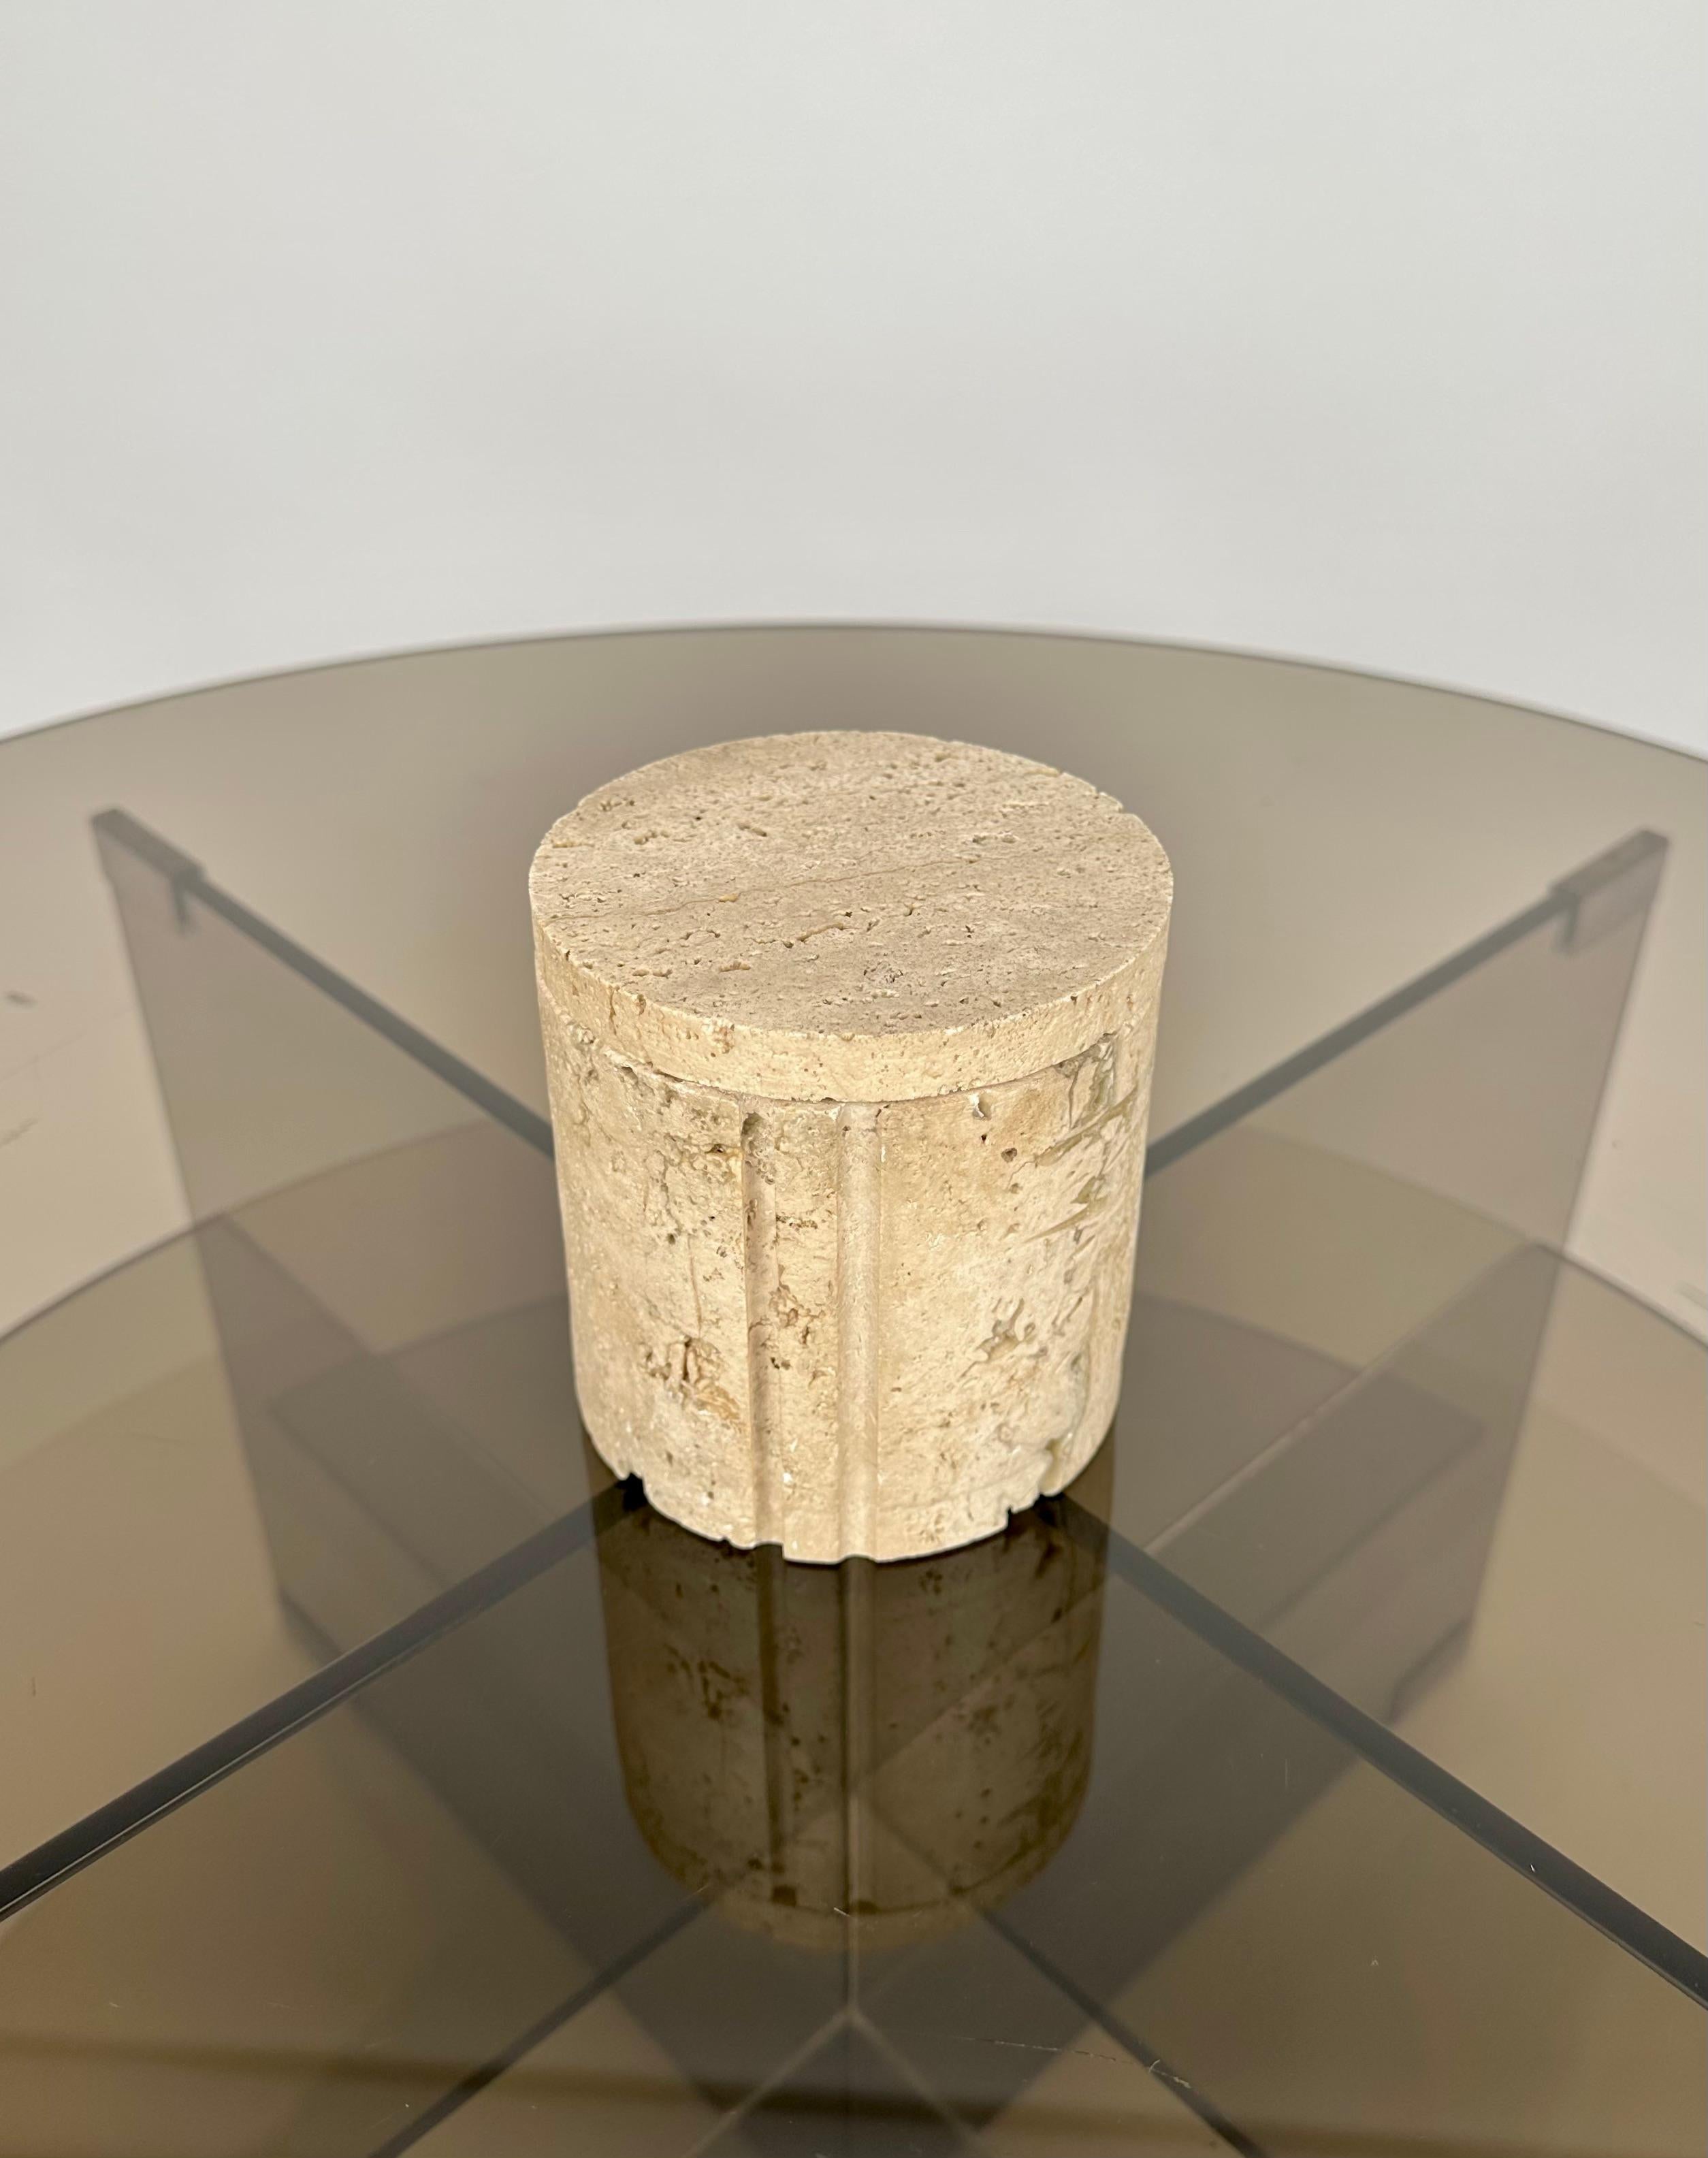 Cylindrical box in travertine marble by Fratelli Mannelli.

Made in Italy in the 1970s.